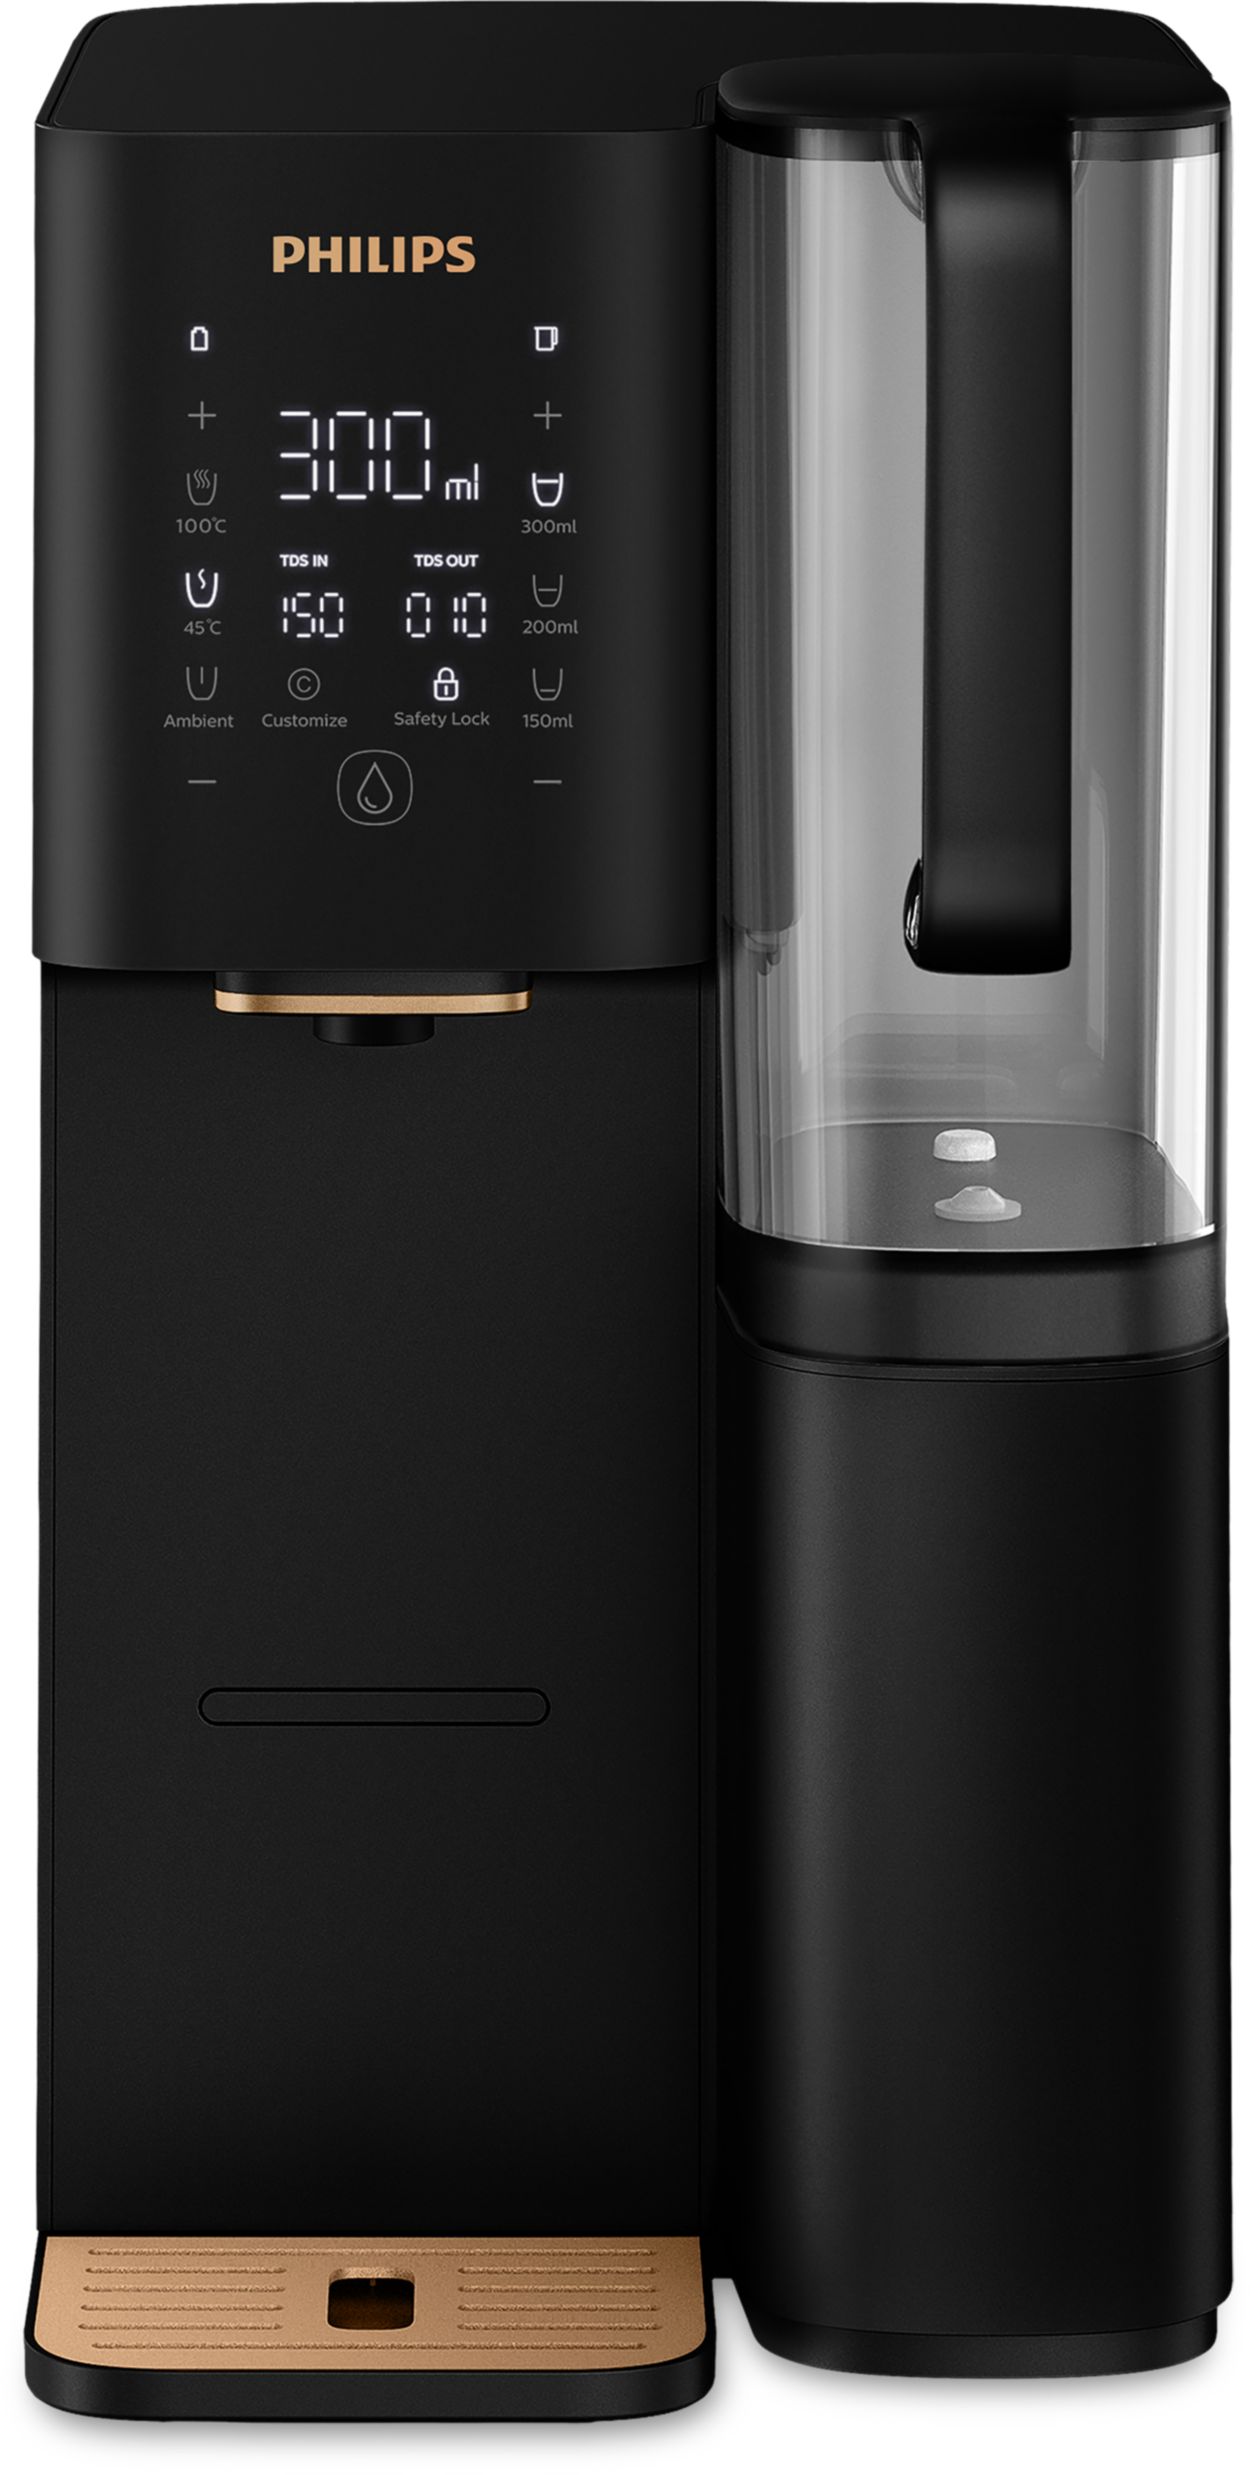 Introducing Philips Reverse Osmosis Water Station, Hot & Cold! Enjoy pure  tasting water!, Philips Water Solutions posted on the topic